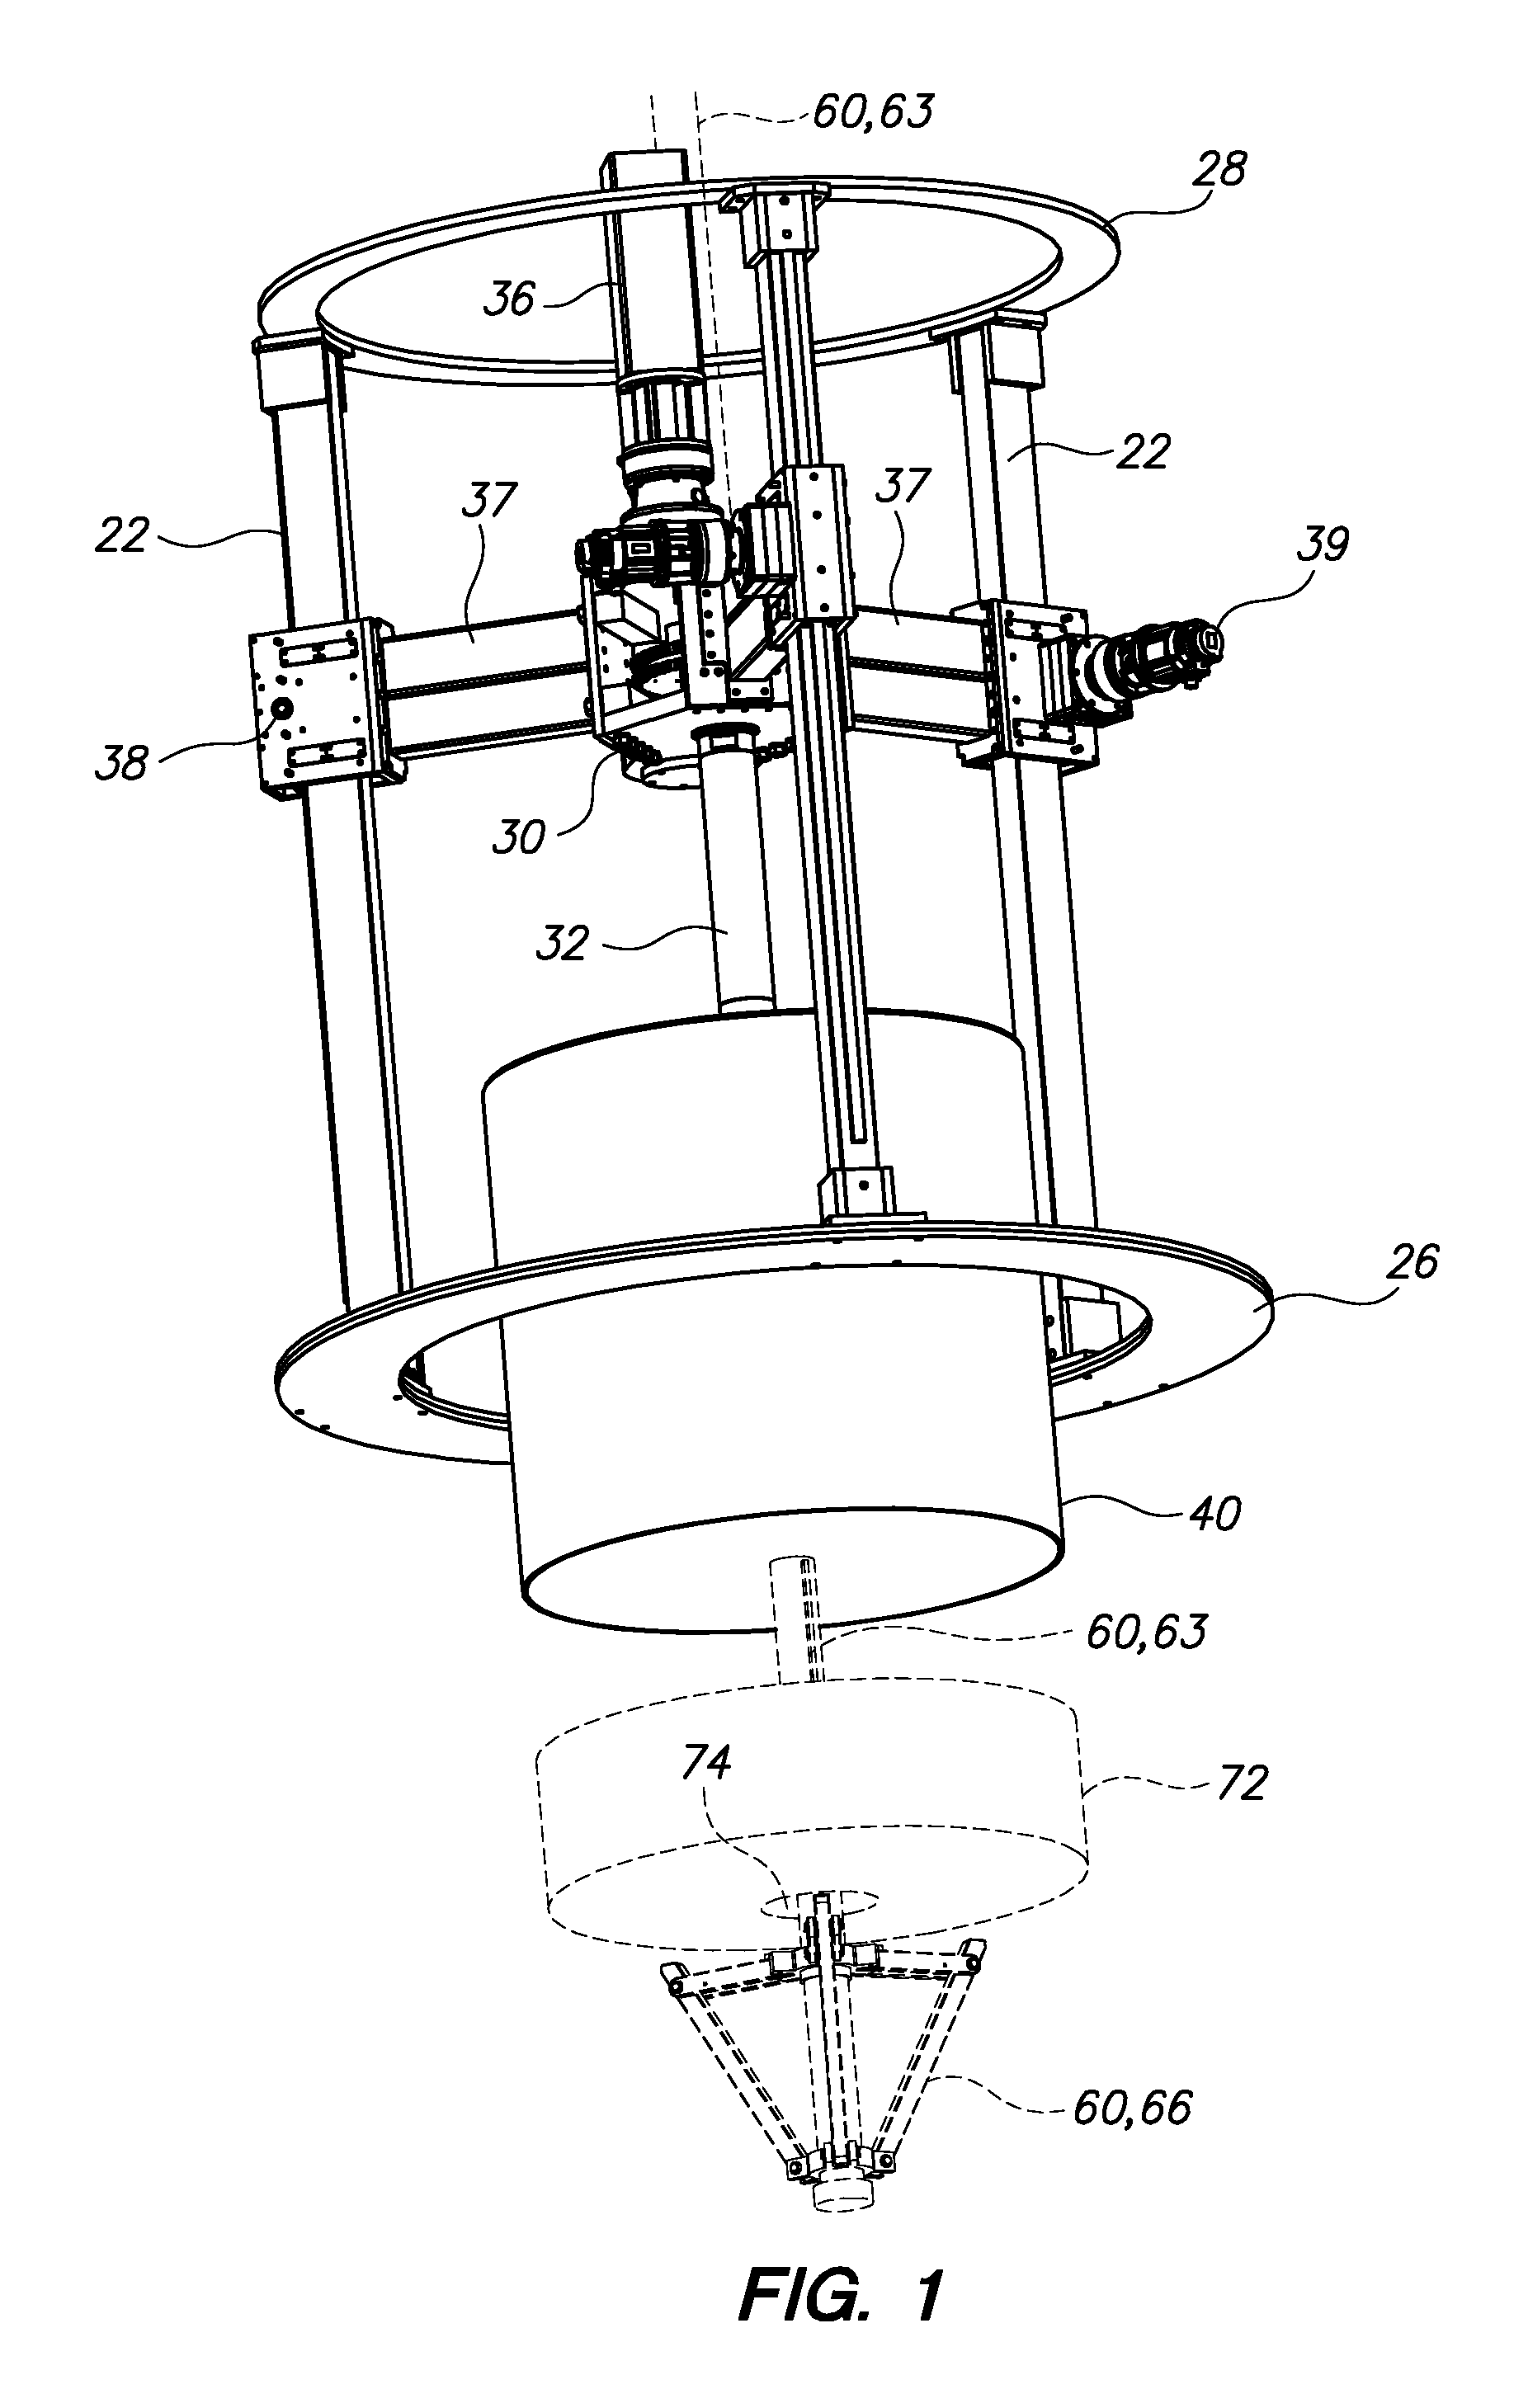 Automated core drilling device capable of mating with a center-mounted core-catching device